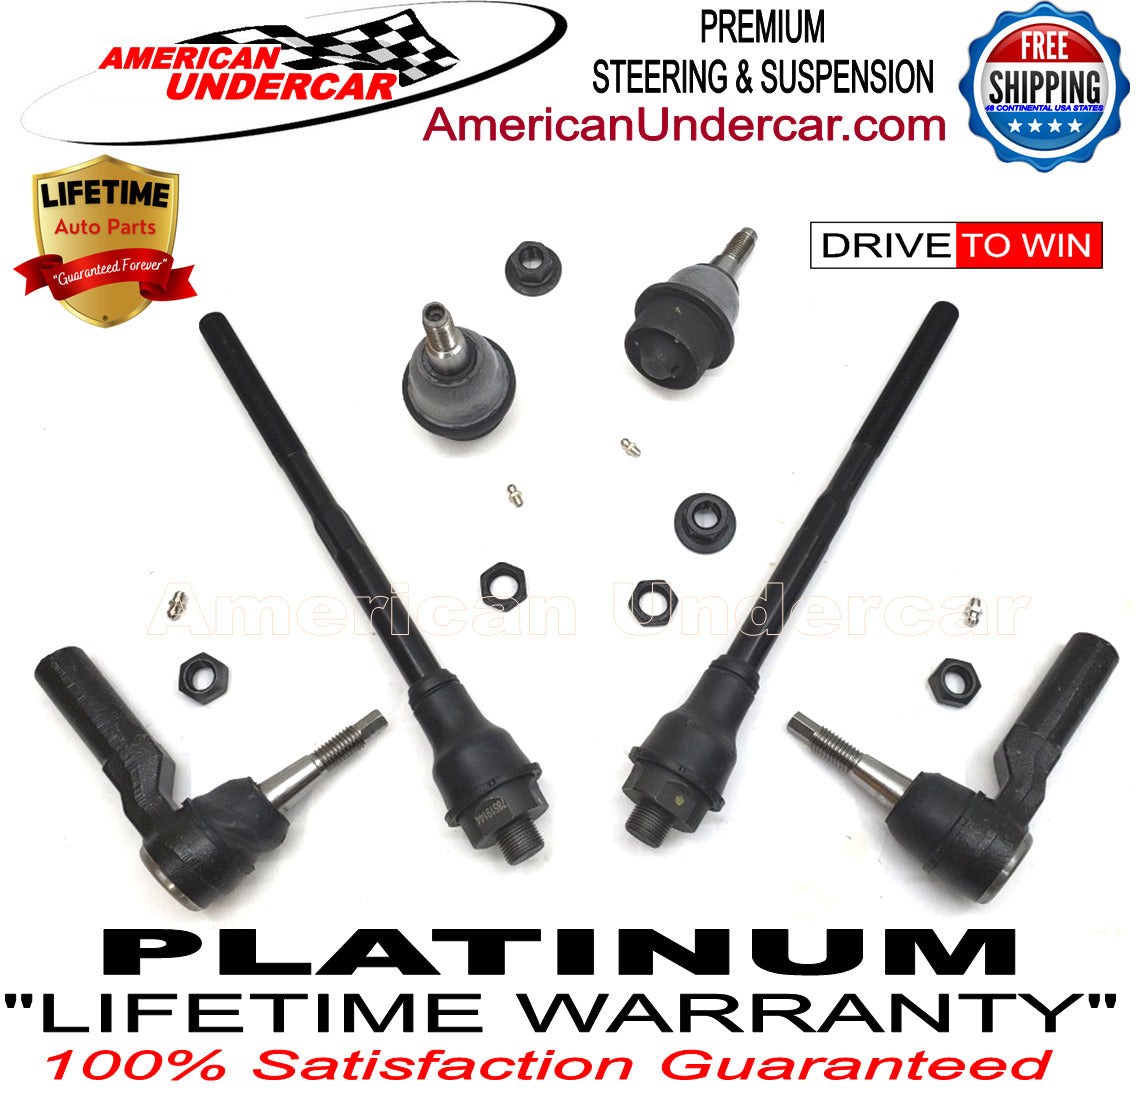 Lifetime Lower Ball Joint & Tie Rod End Kit for 2011-2019 Chevrolet, GMC, 2500HD. 3500HD 2WD, 4x4